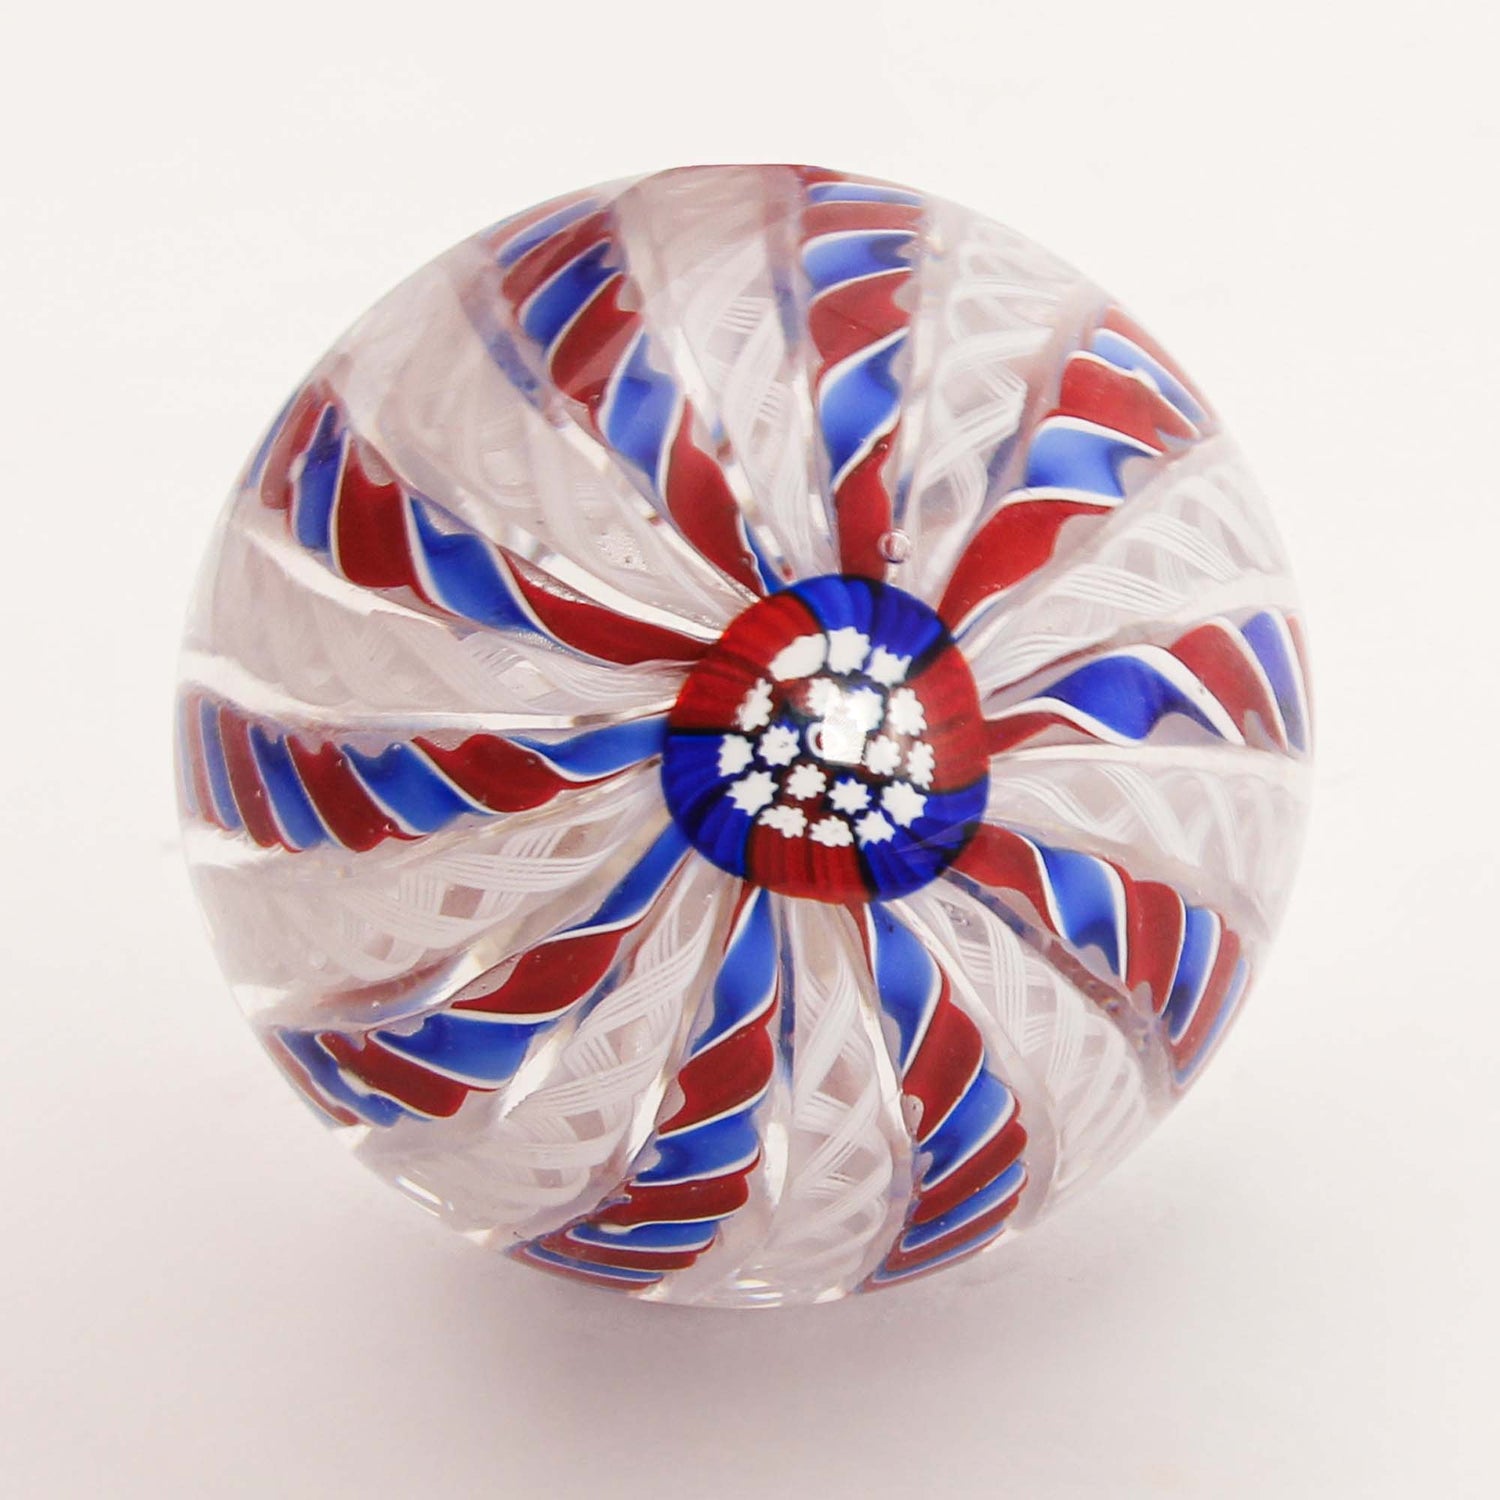 Mille Fiore Art Paper Weight Extra